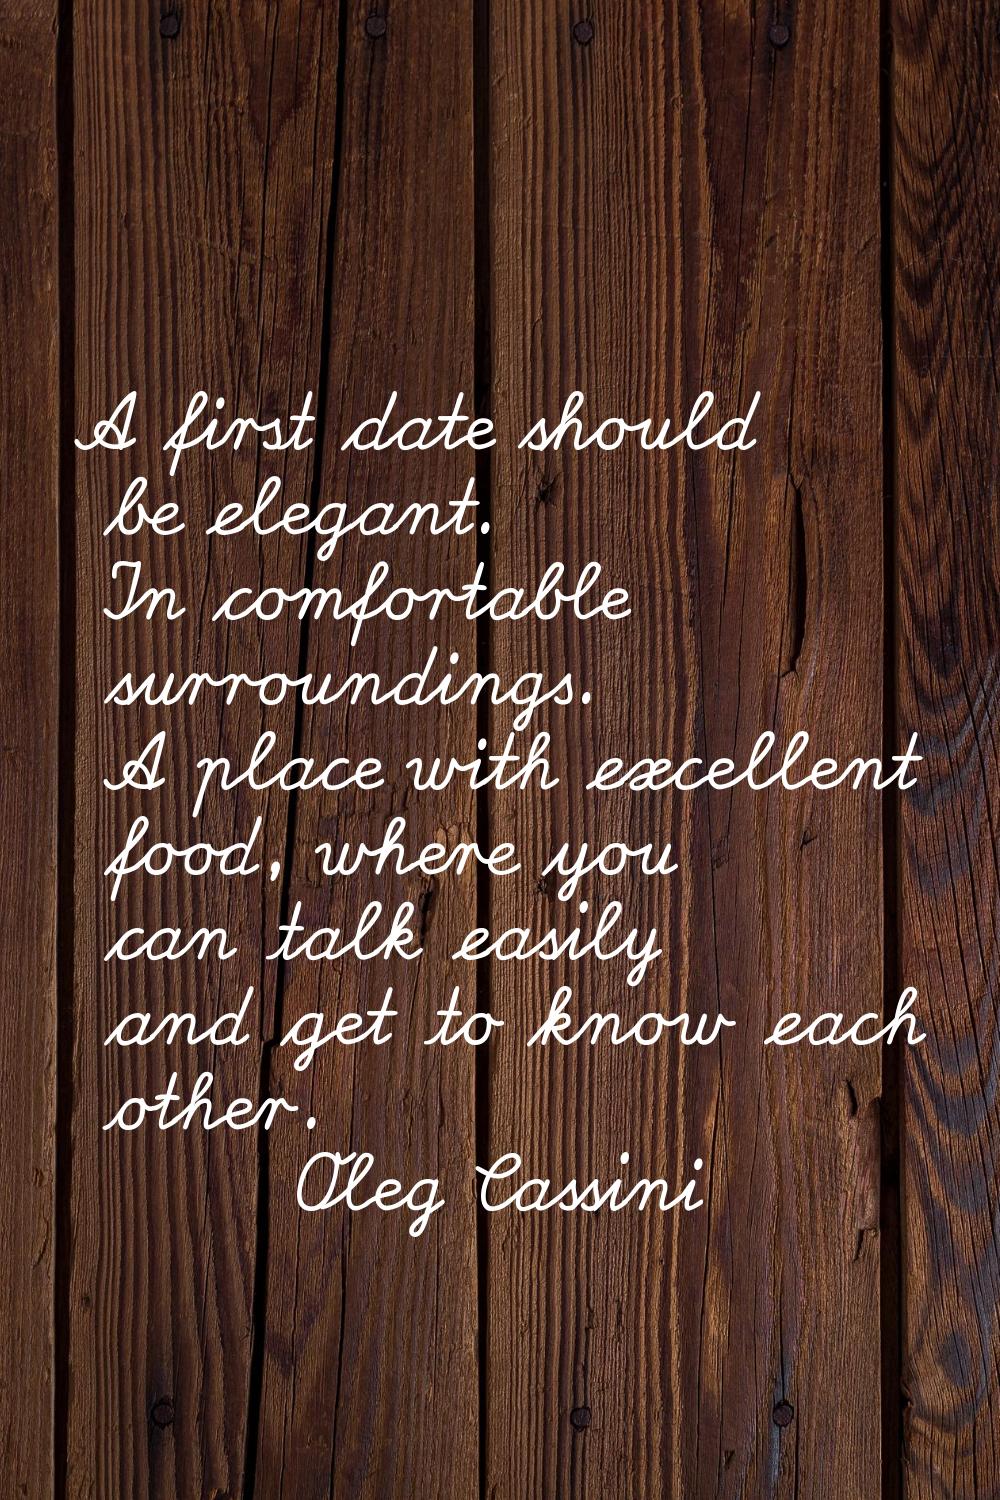 A first date should be elegant. In comfortable surroundings. A place with excellent food, where you